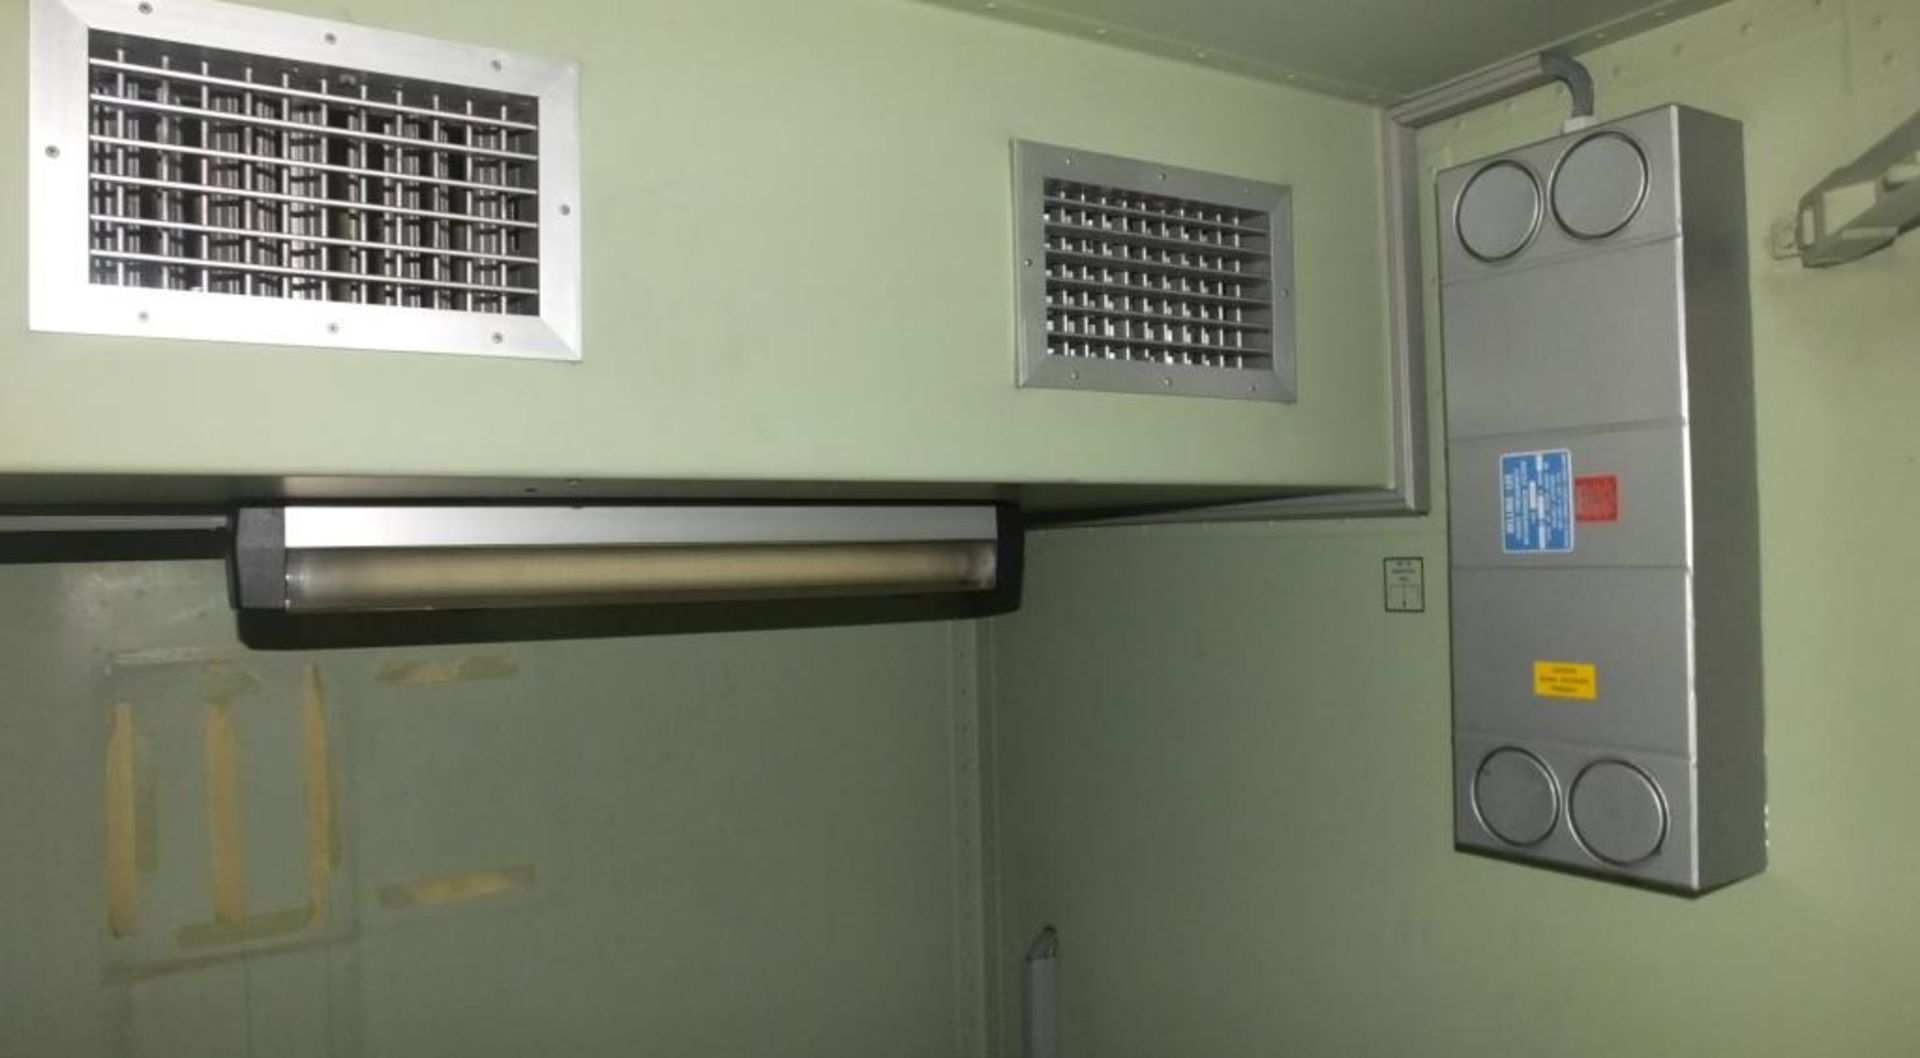 30ft Communication cabin - 19 inch racks, internal doors - LOCATED AT OUR SKEGNESS SITE - Image 10 of 24